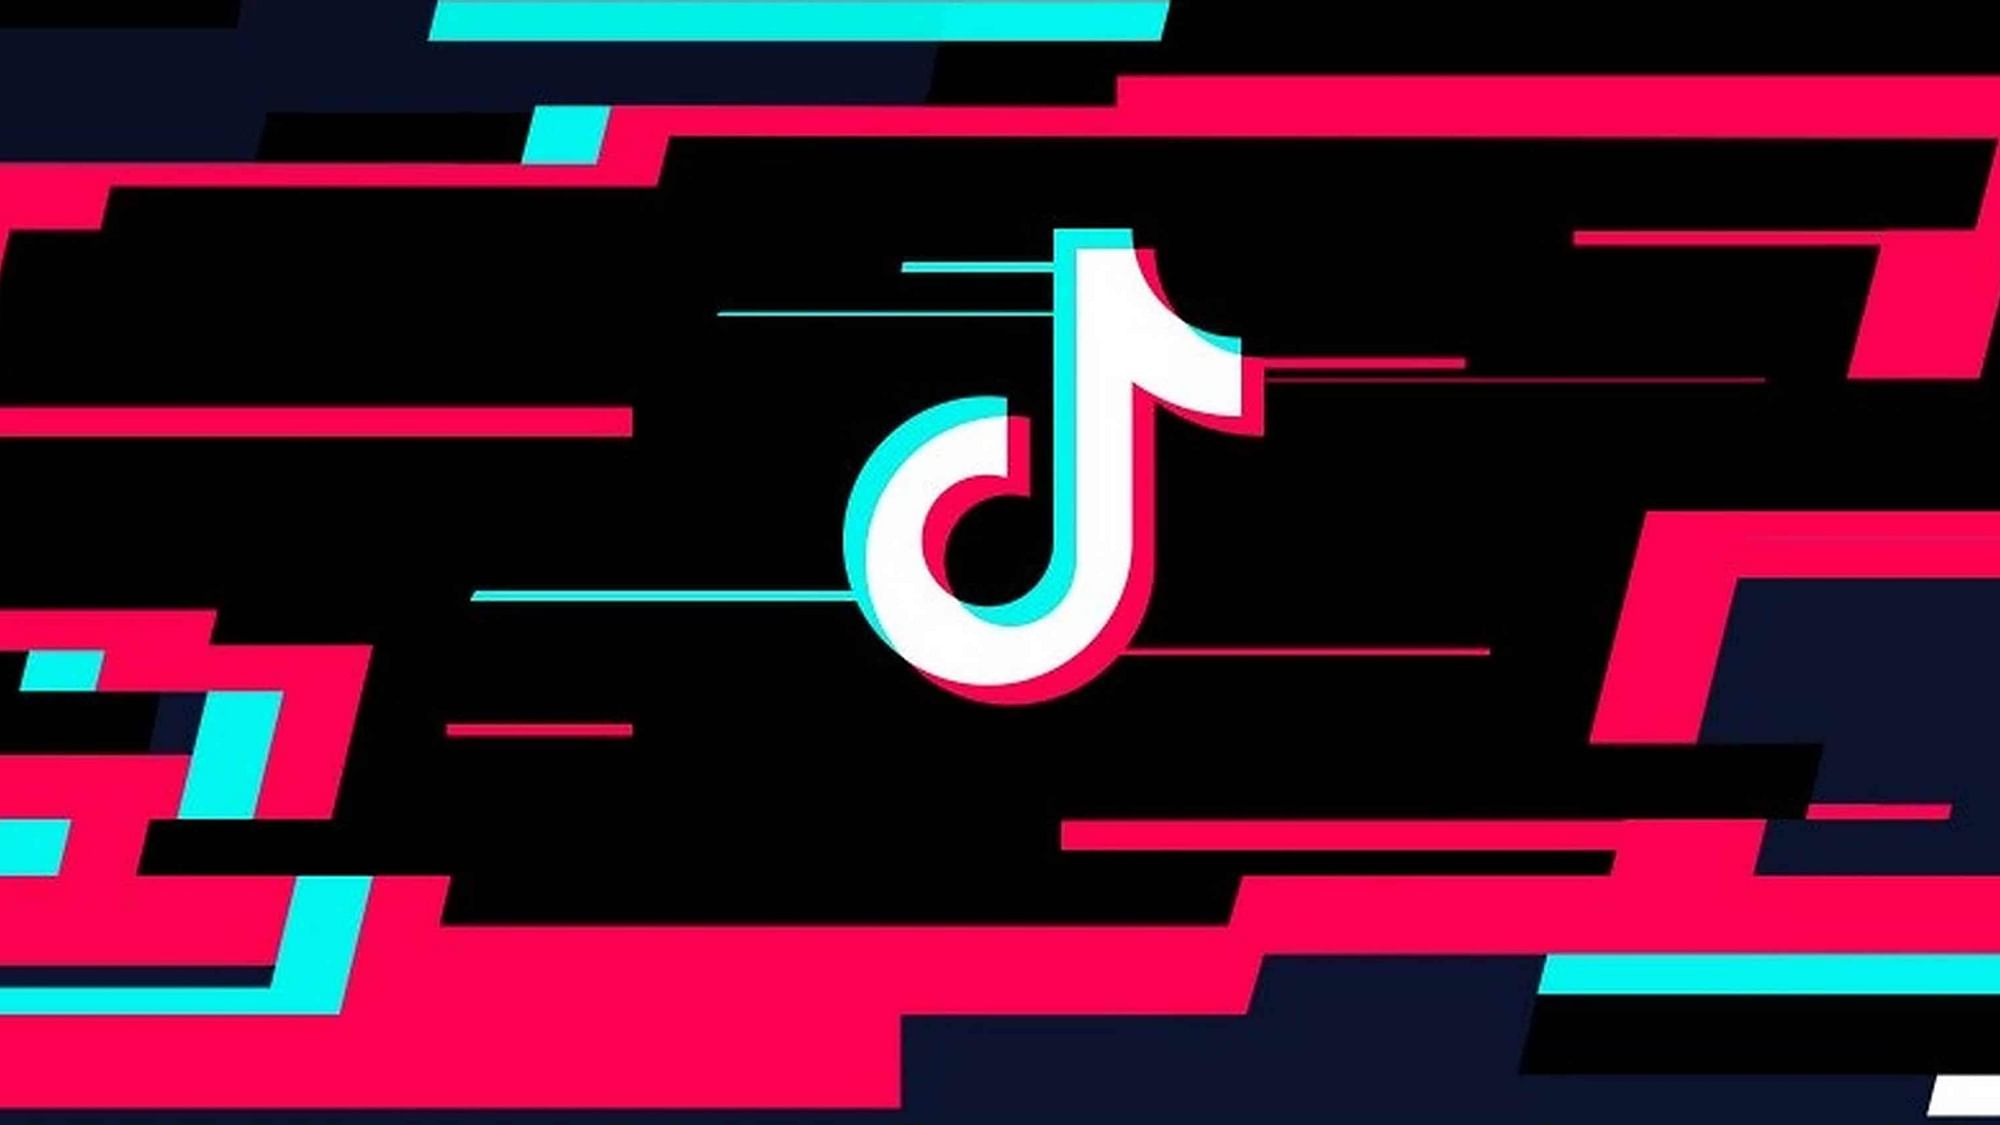 TikTok is owned by Chinese tech company ByteDance.